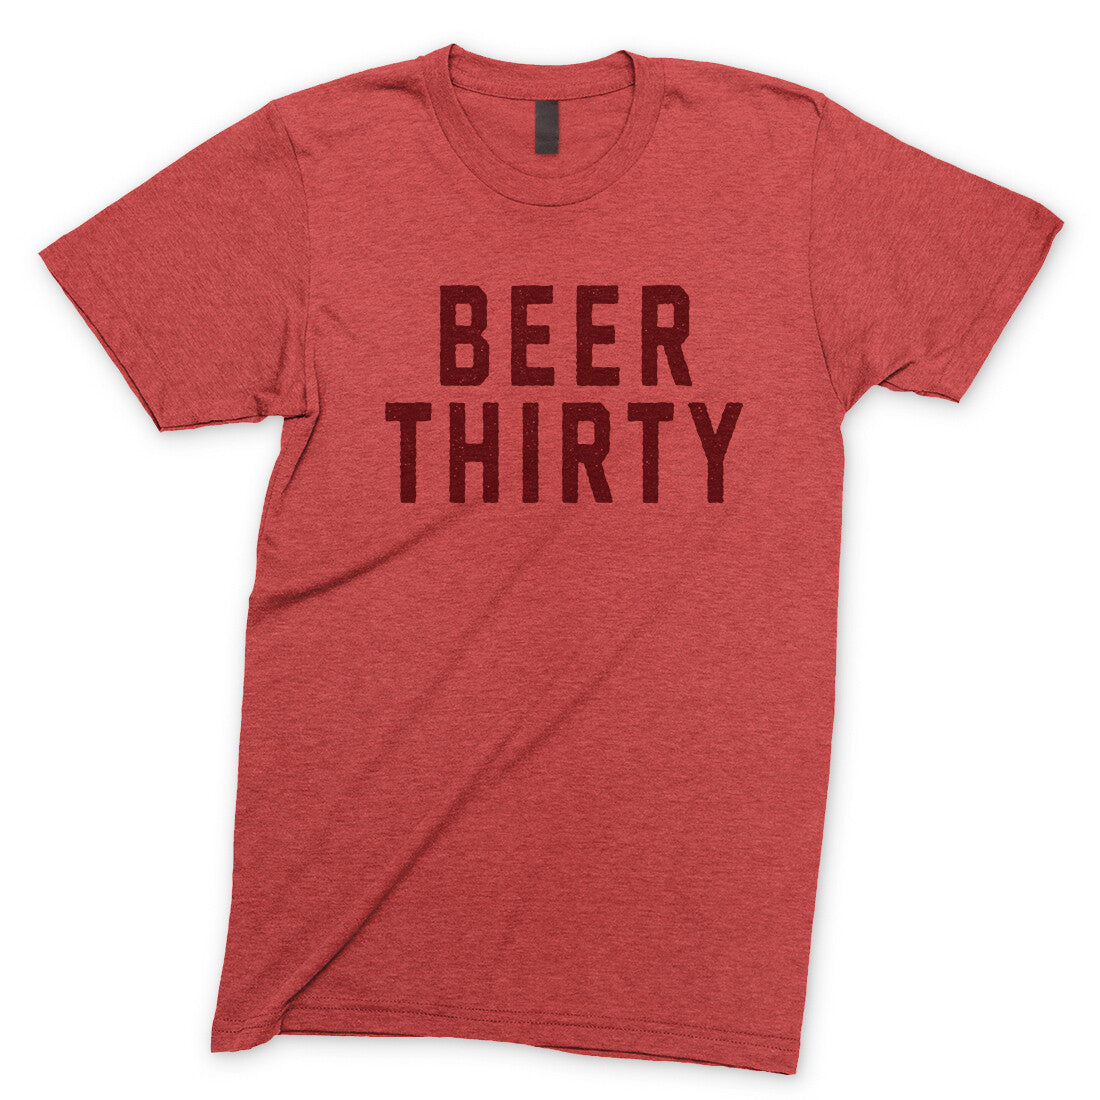 Beer Thirty in Heather Red Color